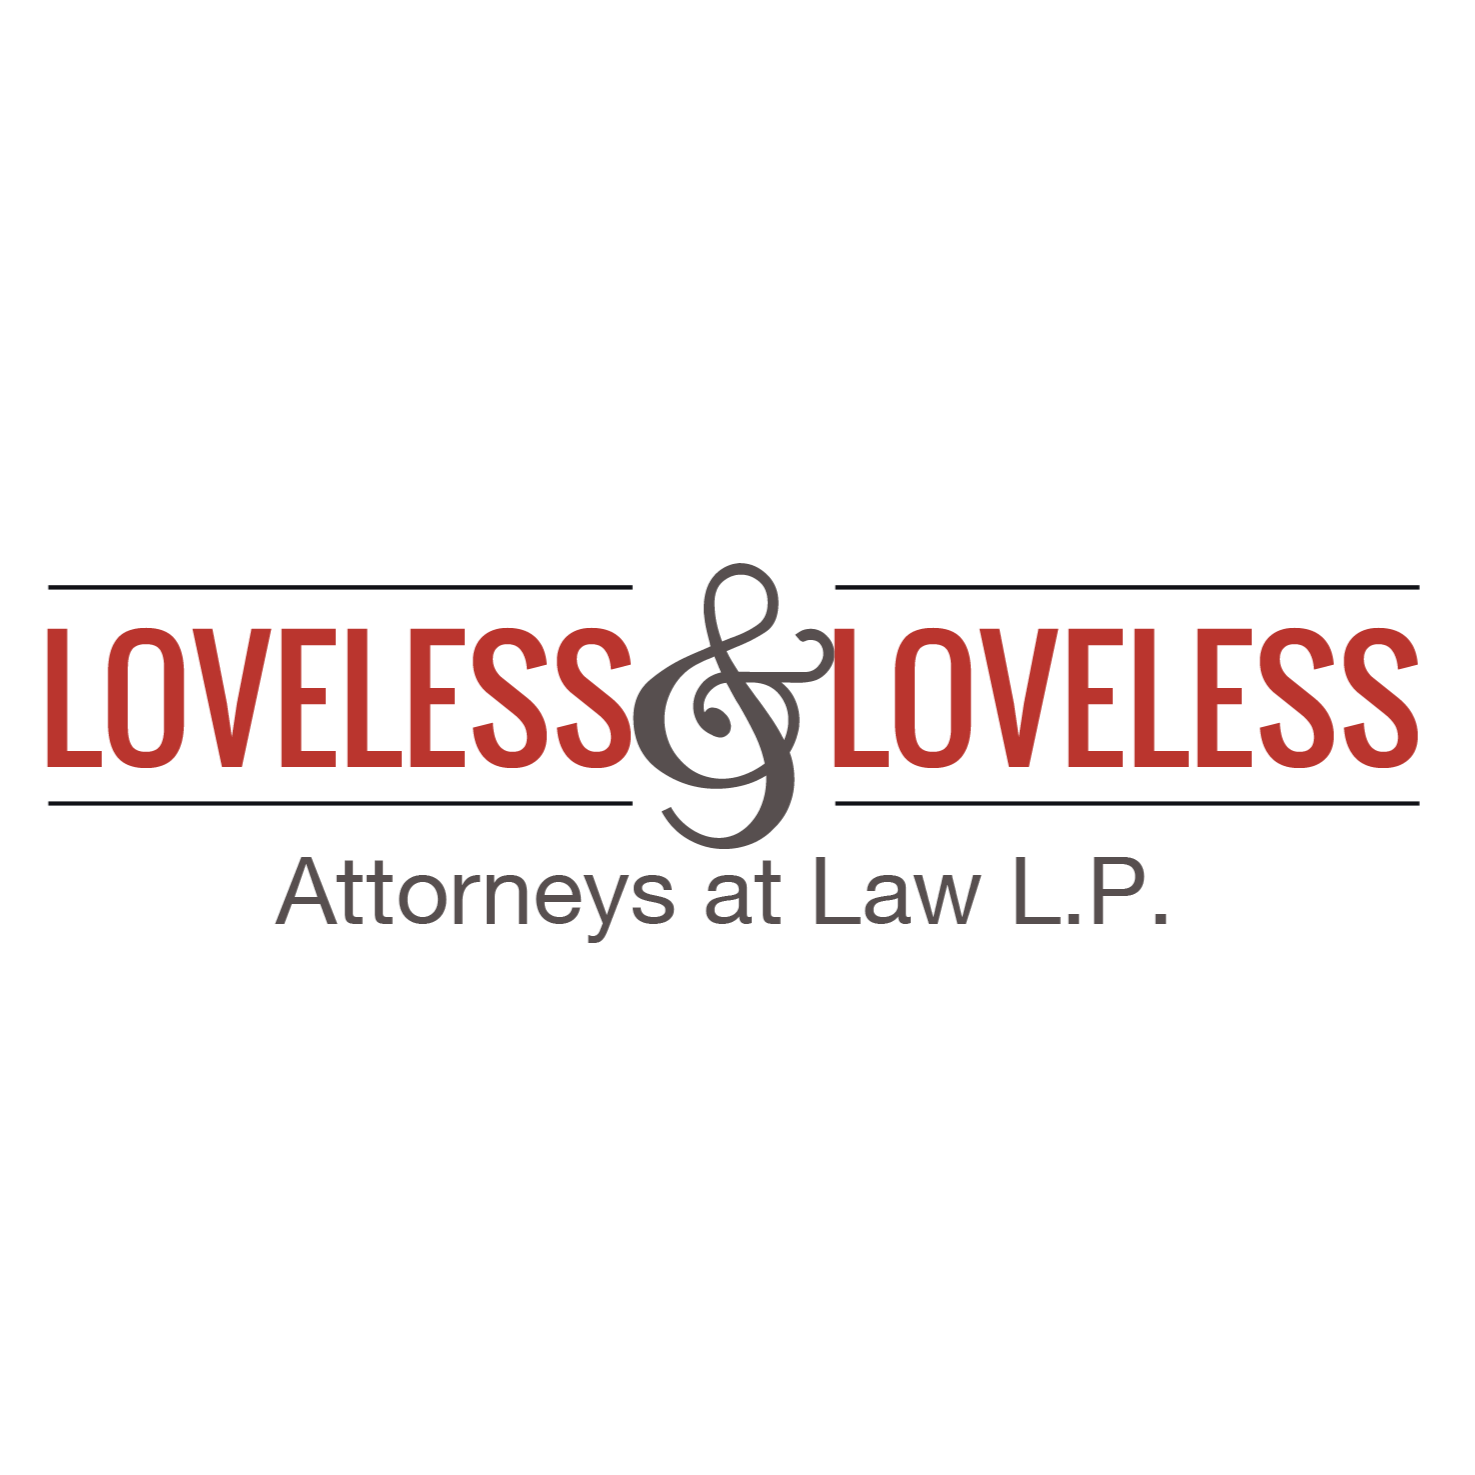 Loveless and Loveless Attorneys at Law, L.P. is a Denton, Texas based law firm. The firm has a long  Loveless & Loveless Attorneys Denton (940)387-3776